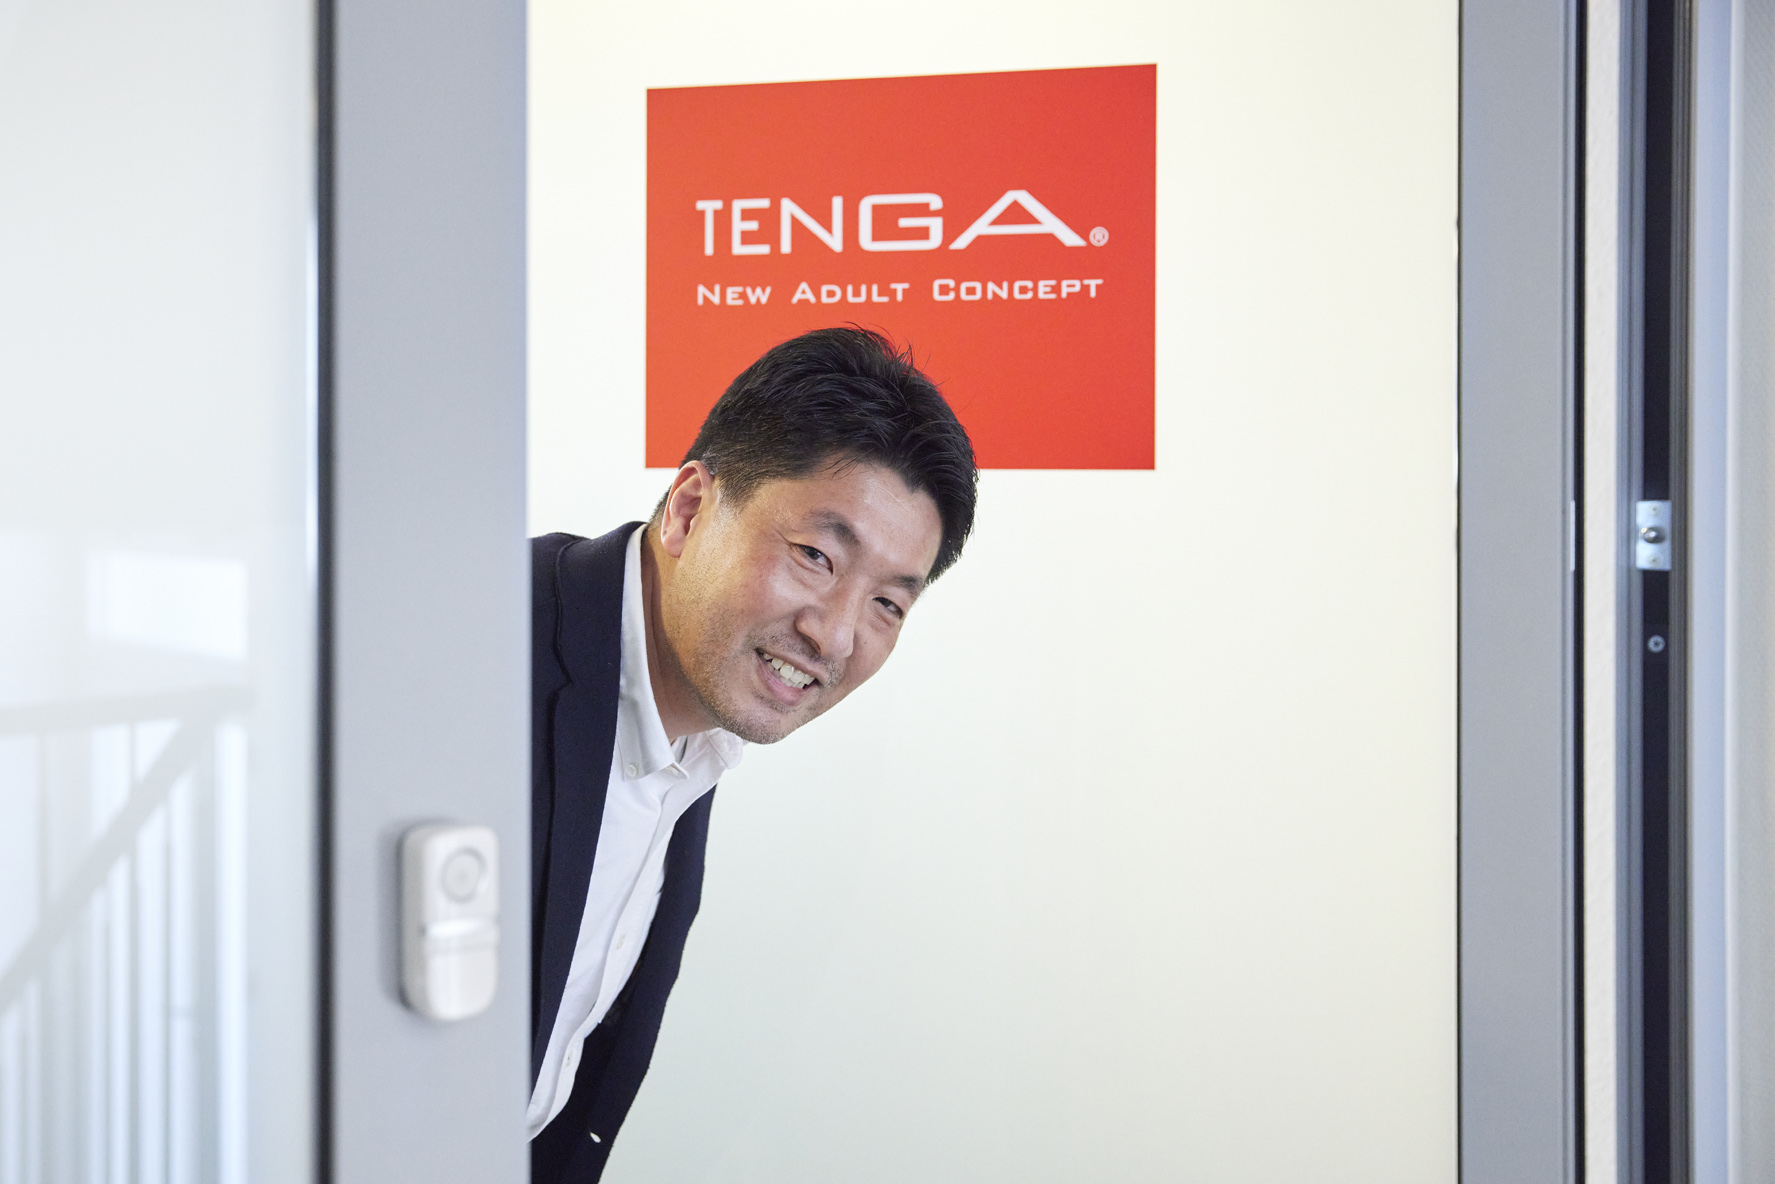 TENGA Only with passion we are capable of changing society. - J-BIG